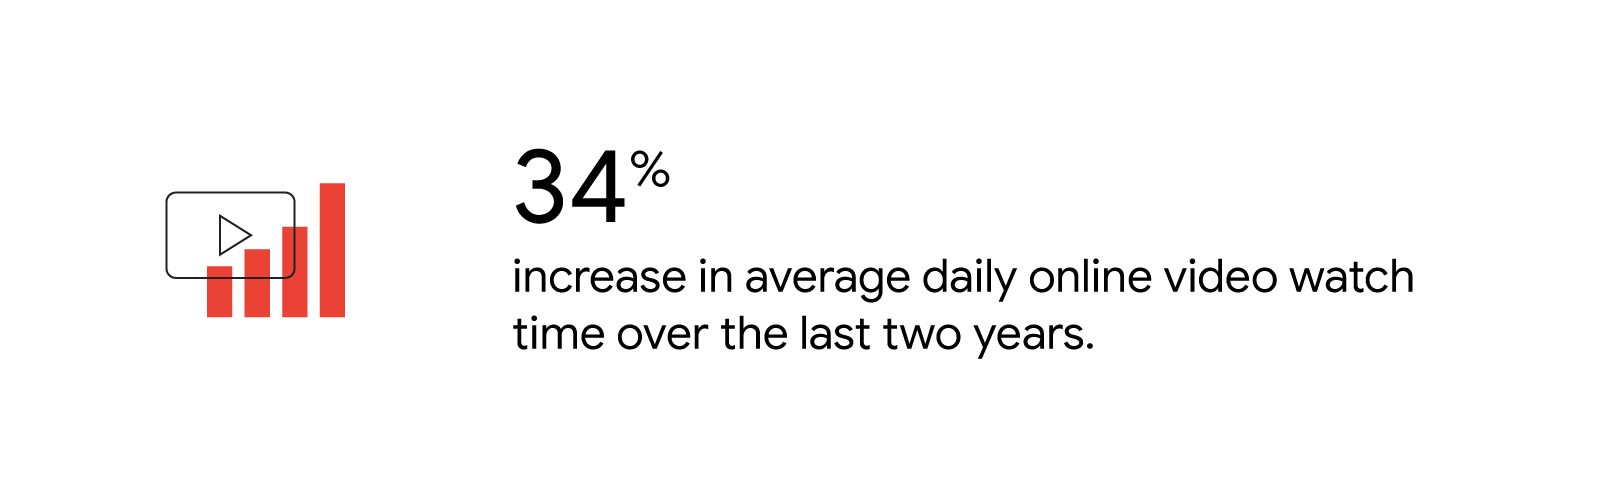 A bar chart shows a 34% increase in average daily online video watch time over the last two years. Source: eMarketer Insider Intelligence, U.S. Average Time Spent with Digital Video, Jan. 2022.